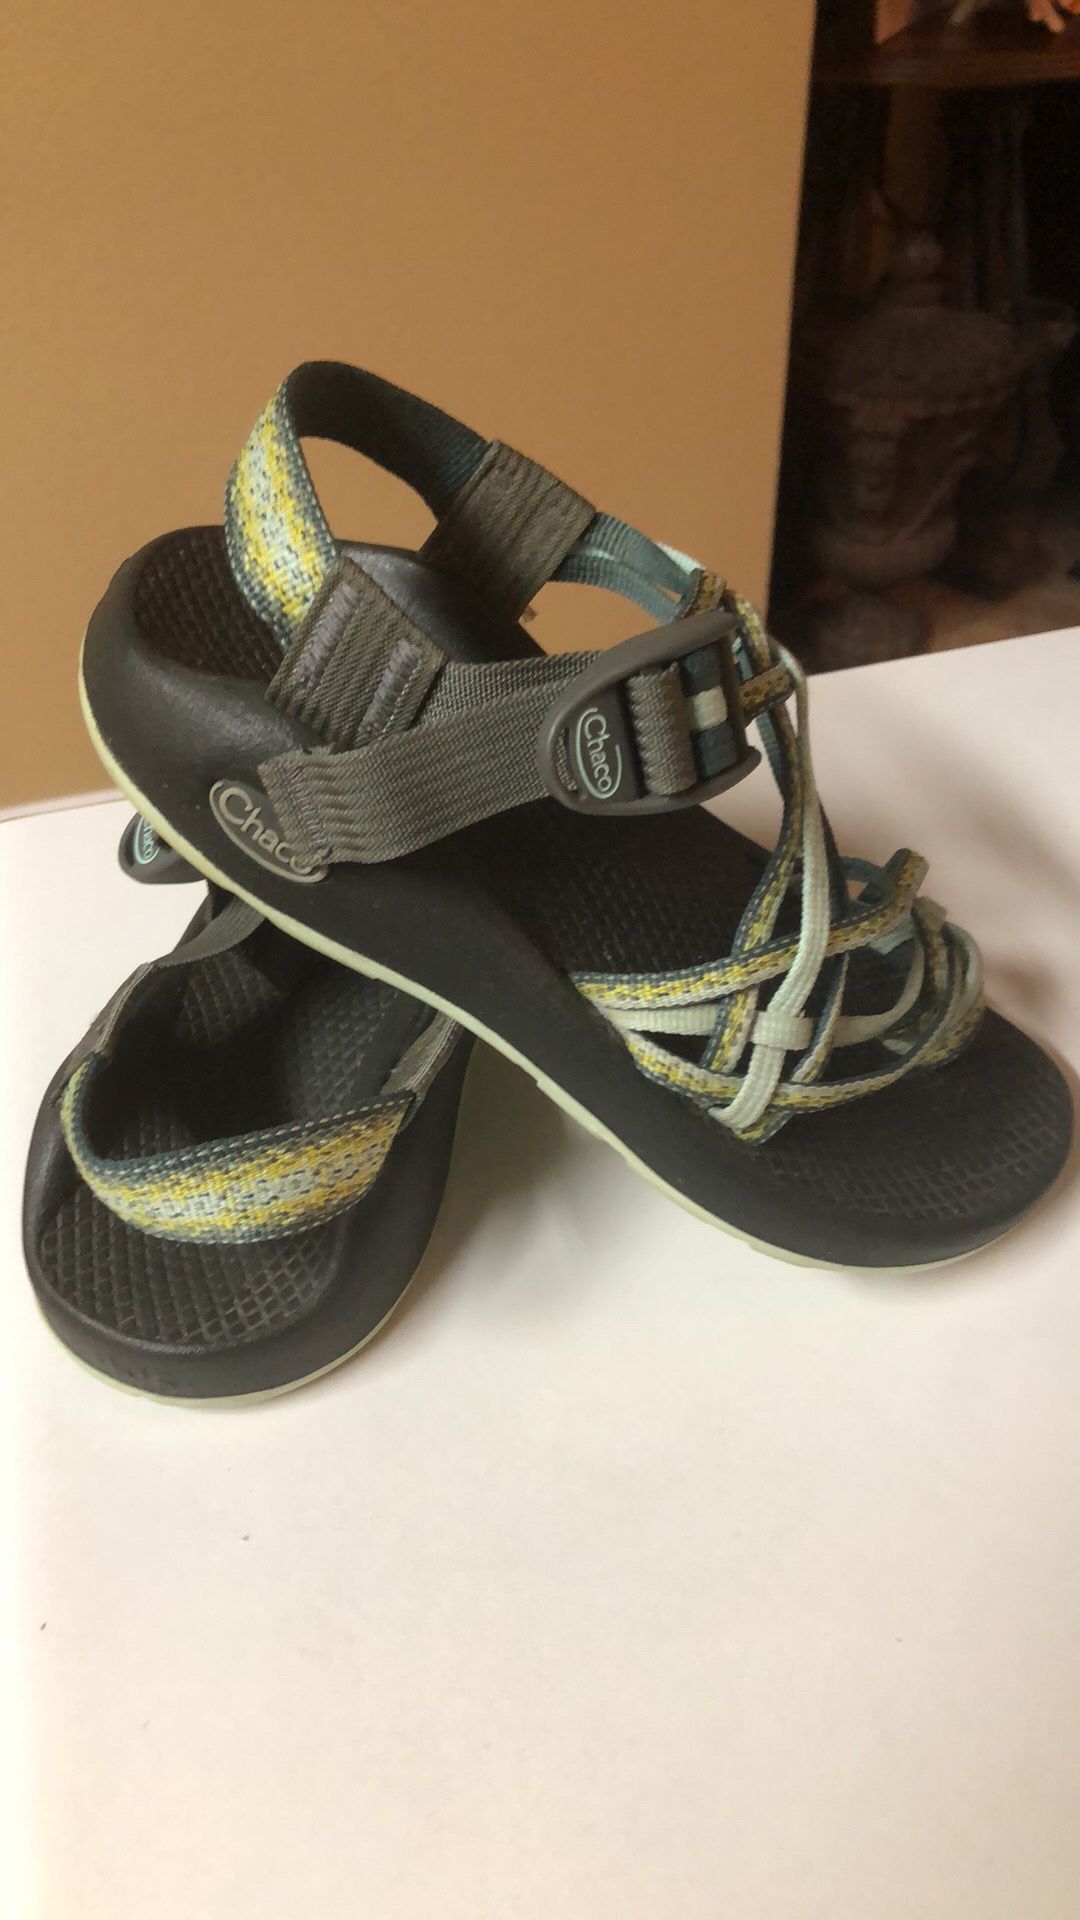 Chaco sandals size 5